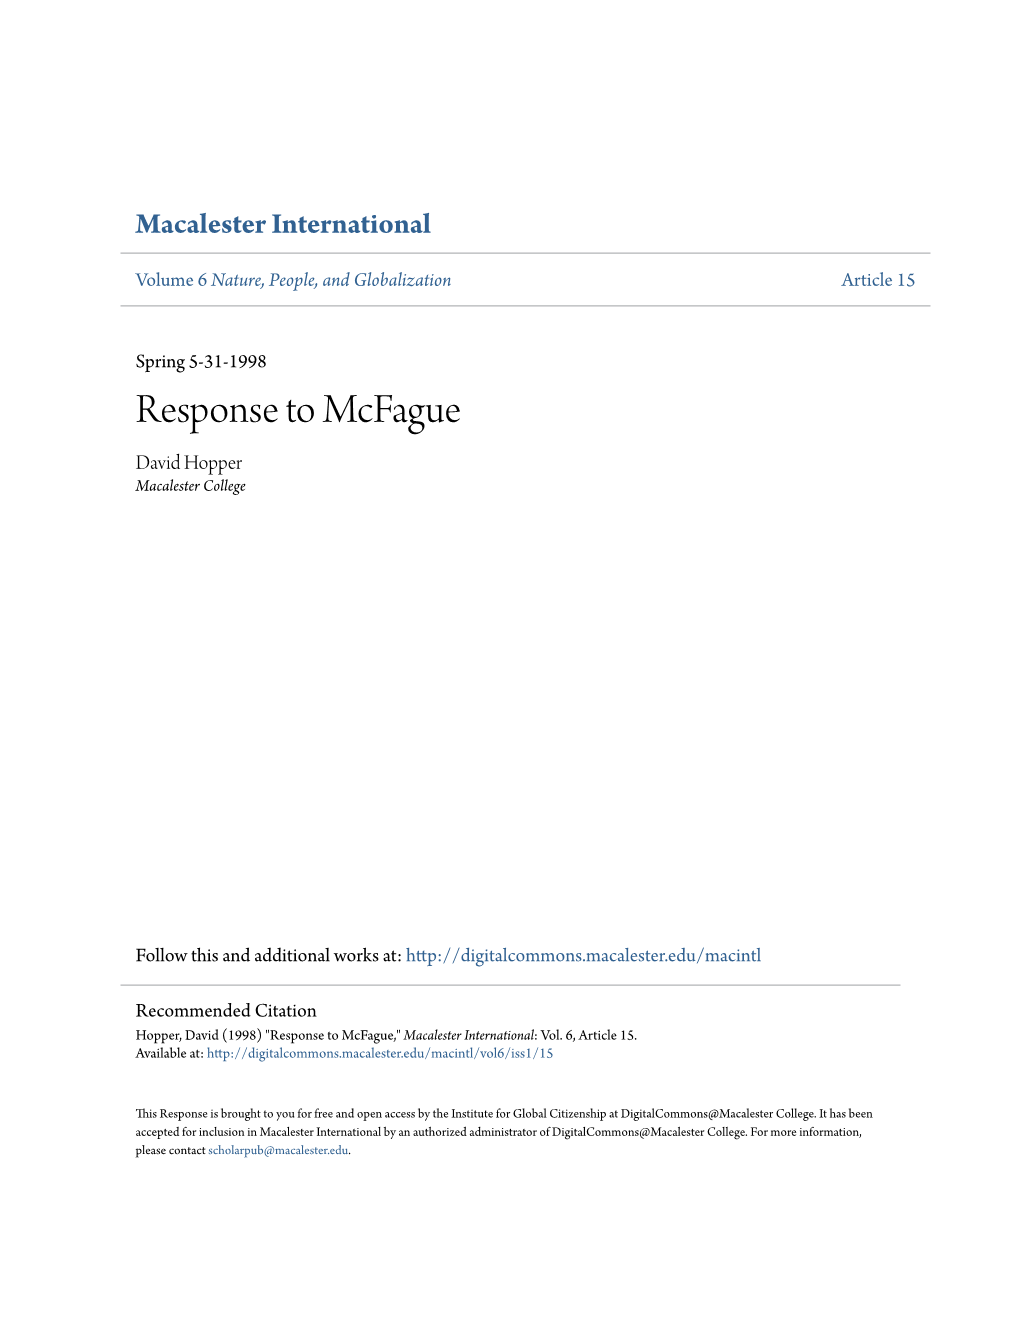 Response to Mcfague David Hopper Macalester College